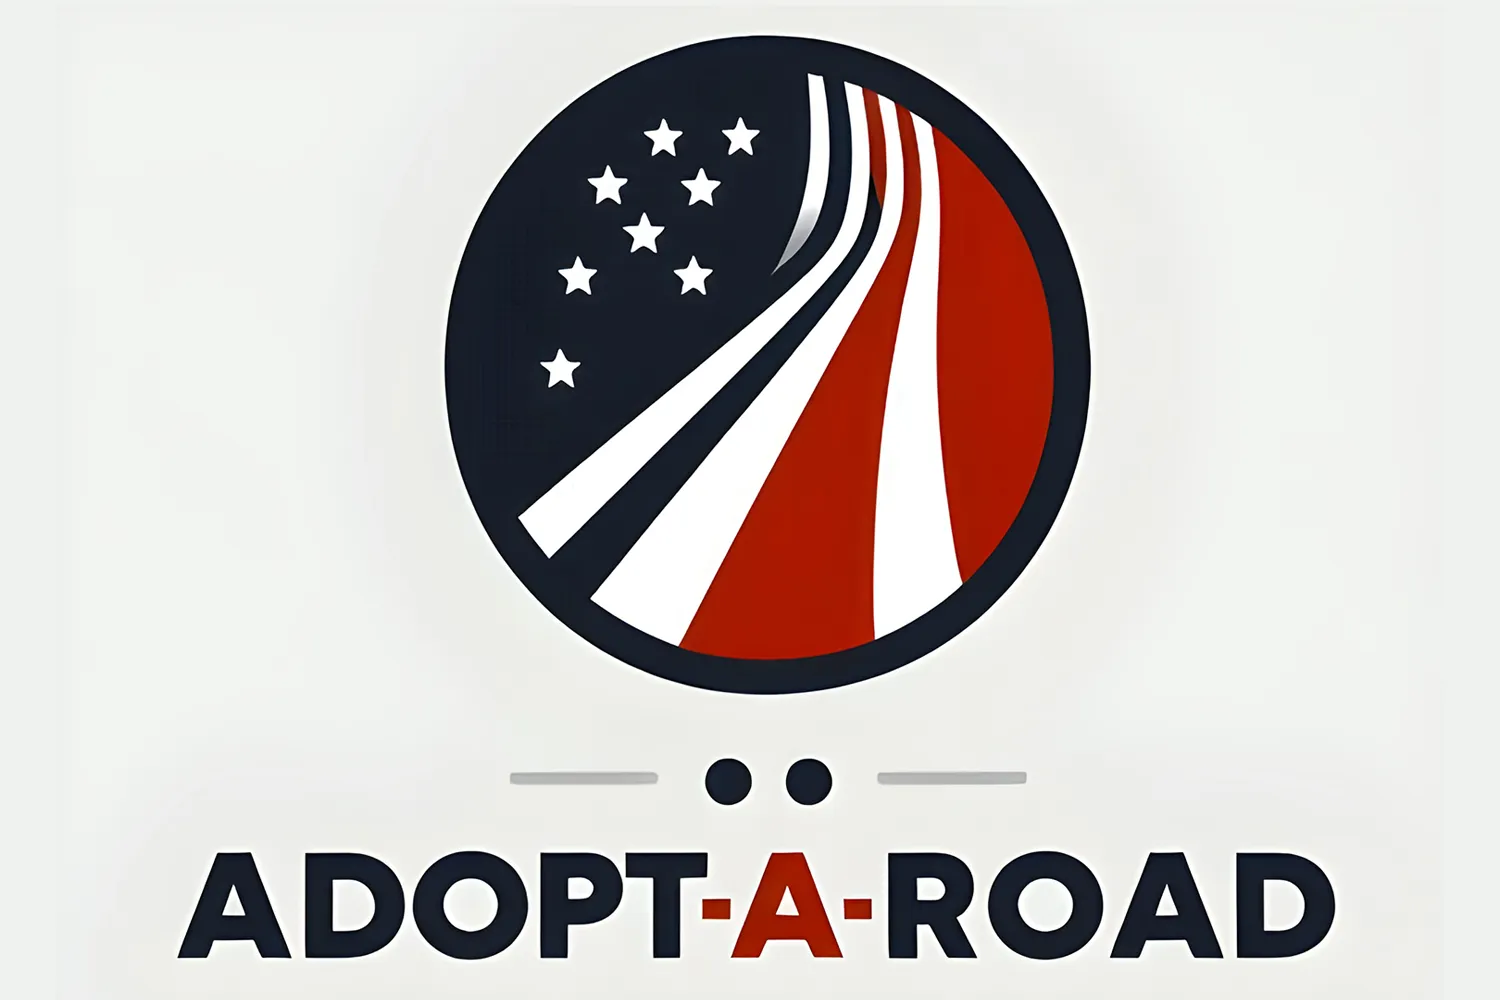 We Adopted-A-Road